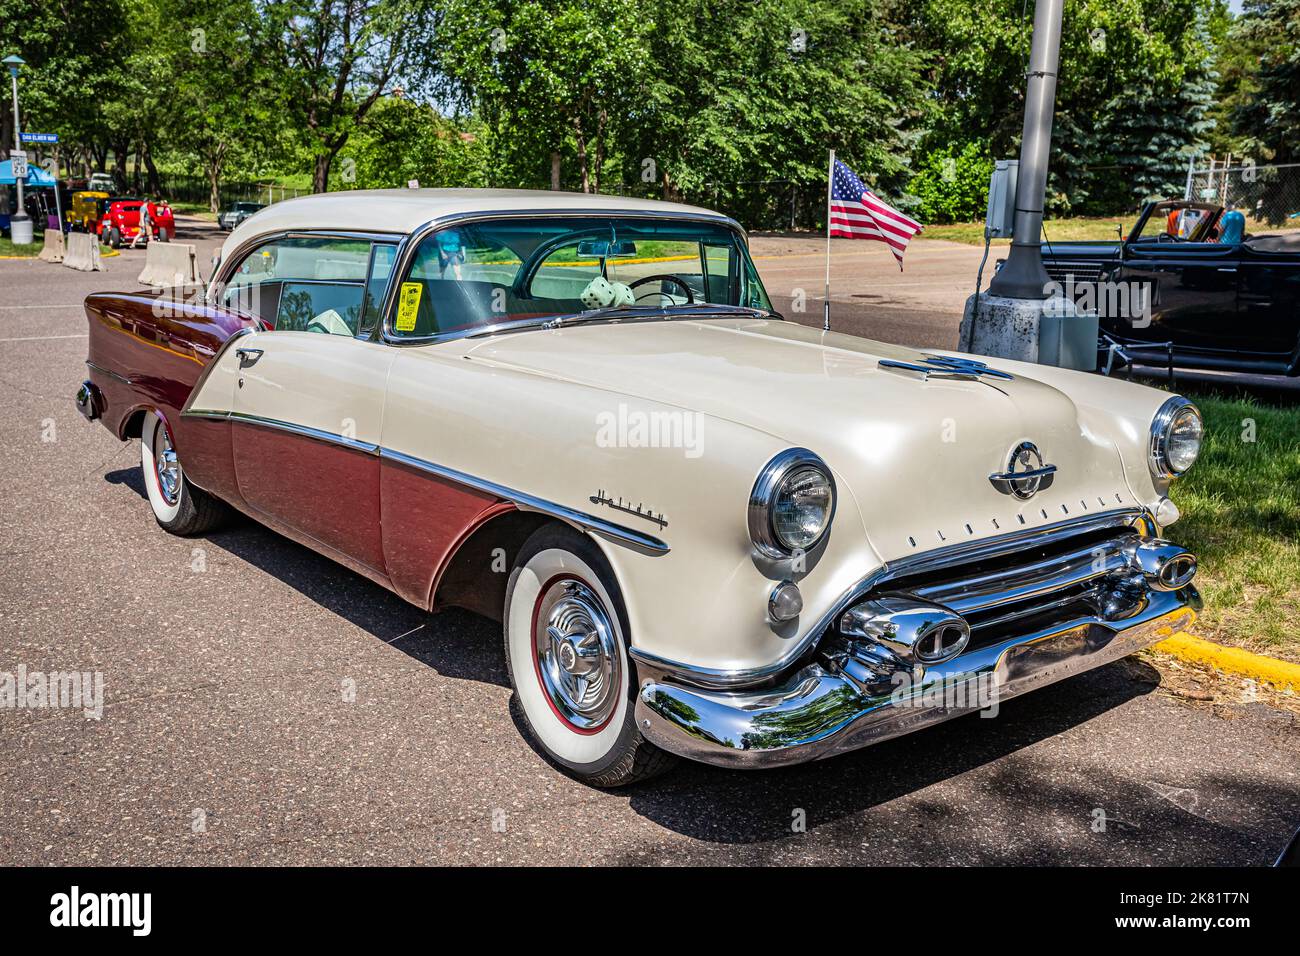 Falcon Heights, MN - June 19, 2022: High perspective front corner view of a 1954 Oldsmobile 98 Holiday Hardtop Coupe at a local car show. Stock Photo